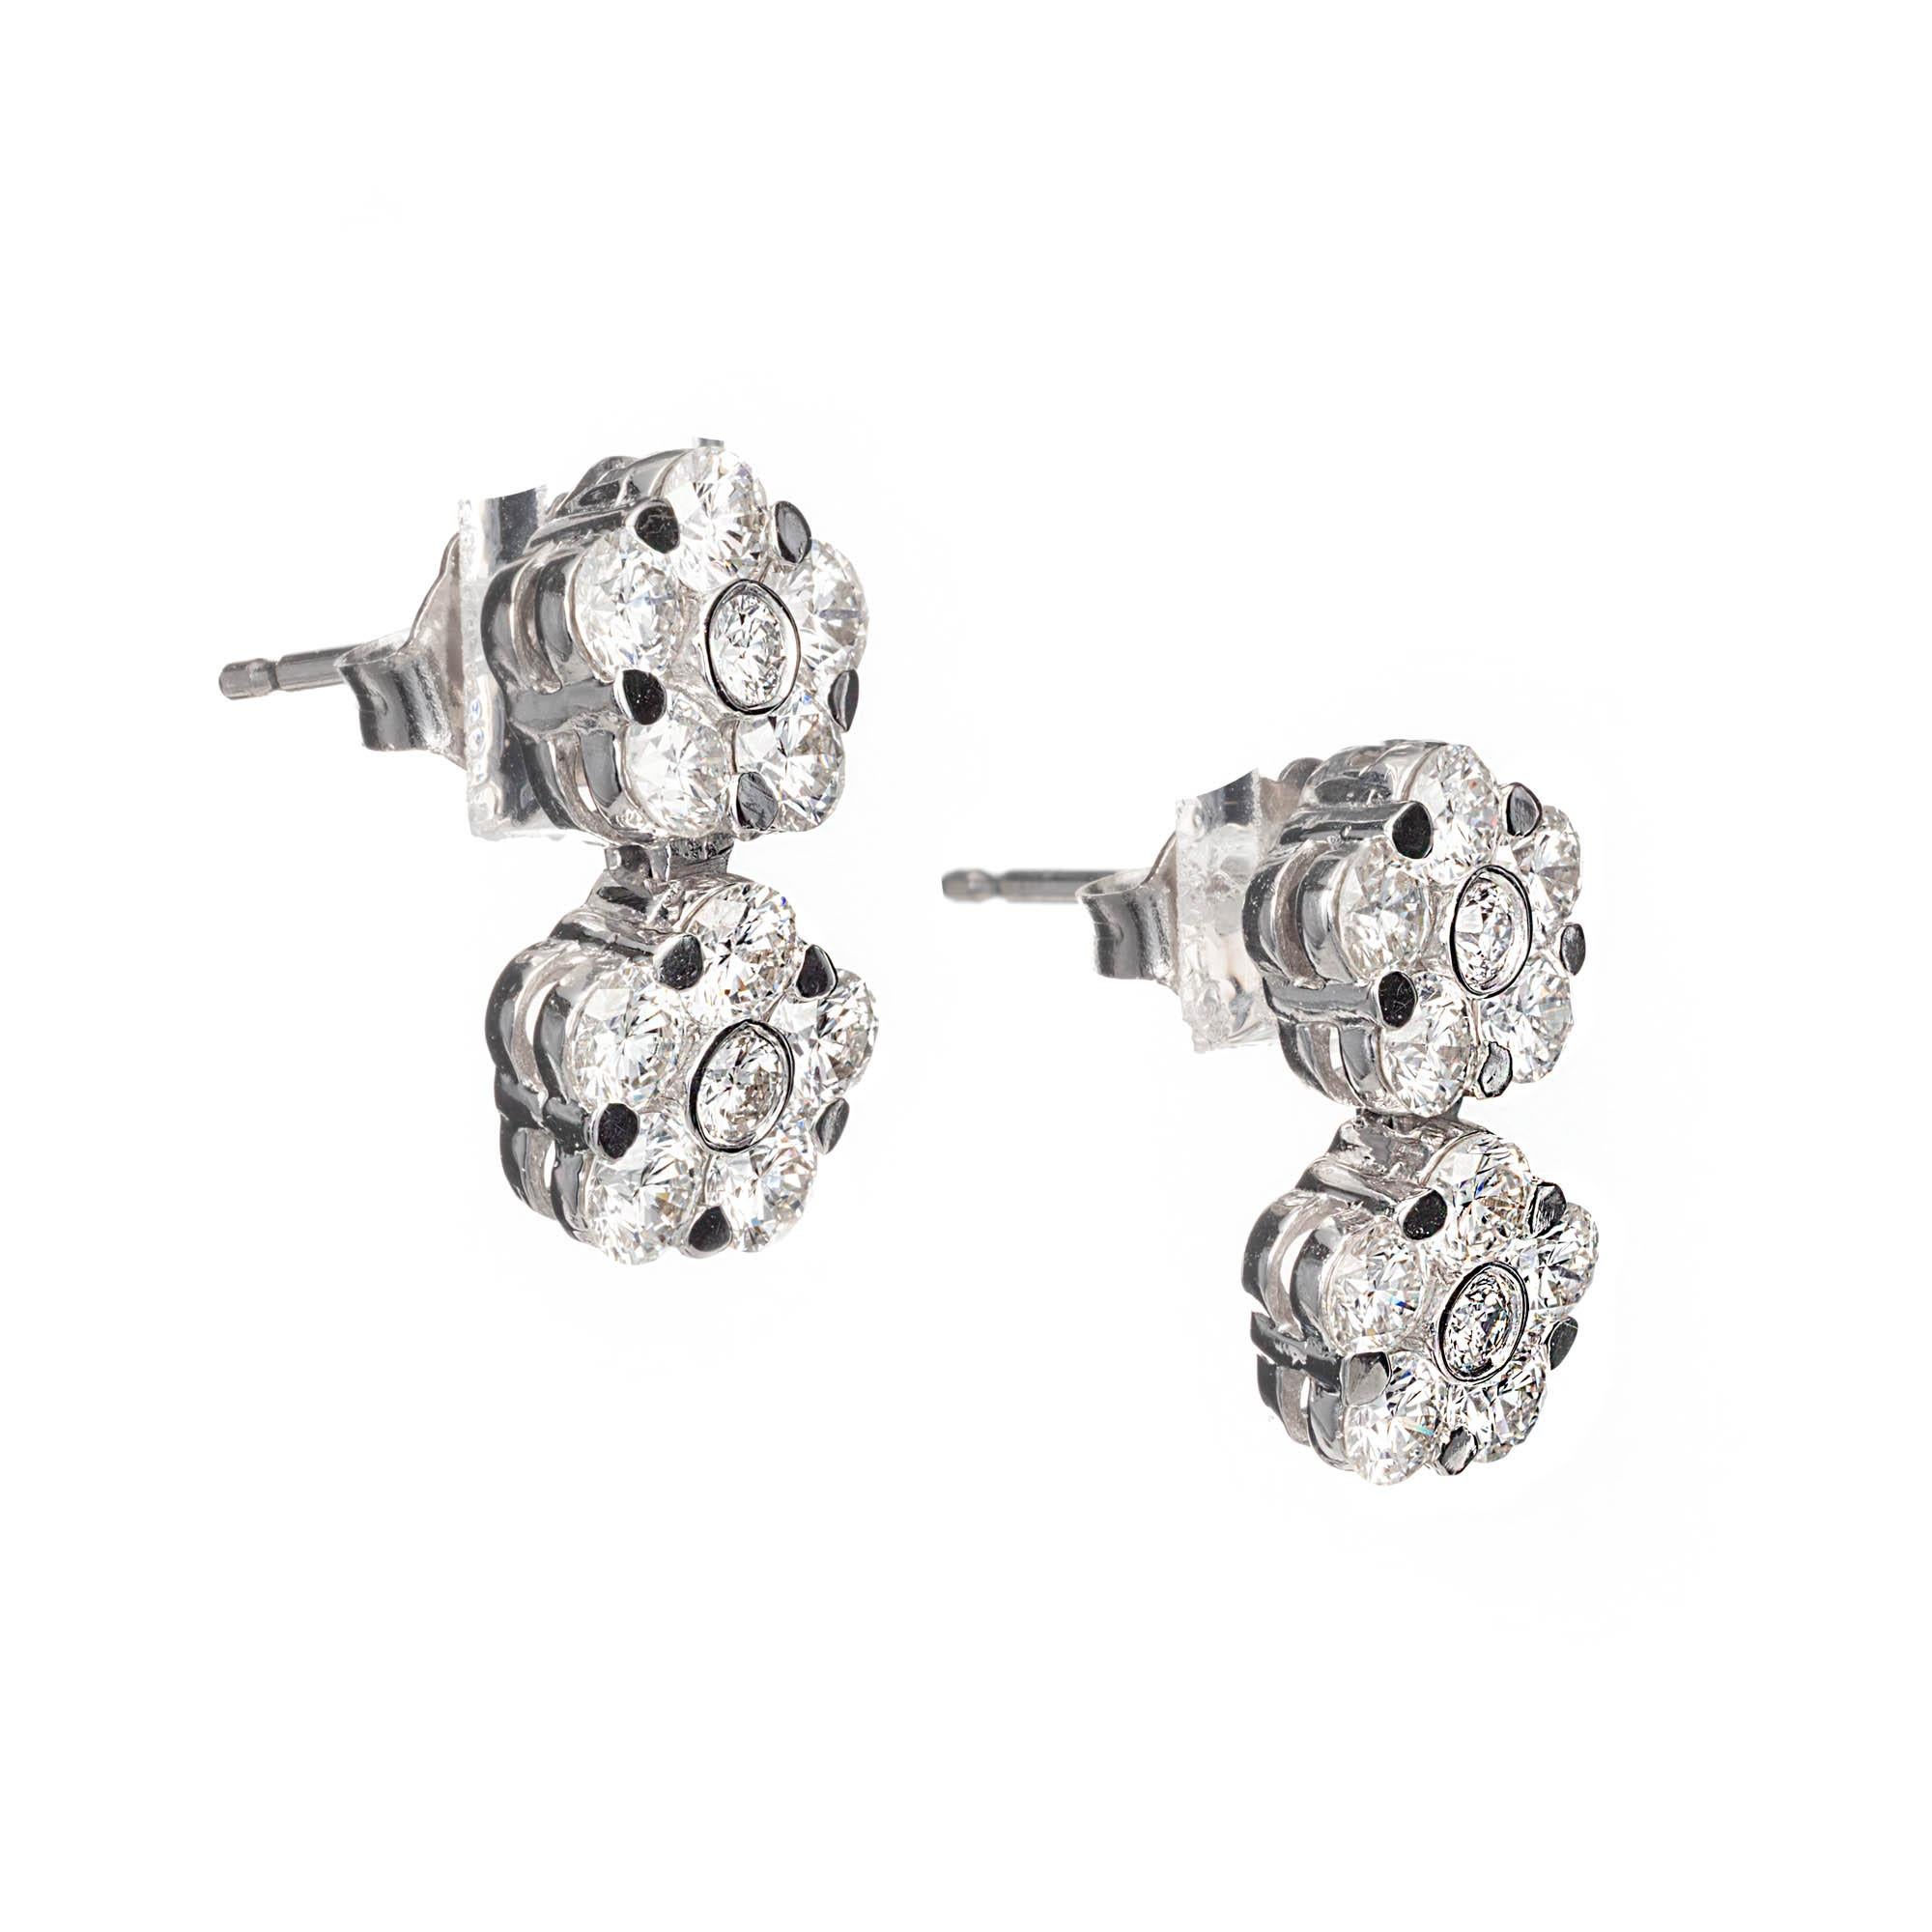 Peter Suchy double cluster 2.12ct diamond dangle earrings in 18k white gold 

24 round brilliant cut F-G VS diamonds, Approx. 2.12 carats
18k White Gold 
Stamped: 18k
3.4 Grams
Top to Bottom: 14.2 or .56 Inches
Width: 7.4mm or .30 Inches
Depth or